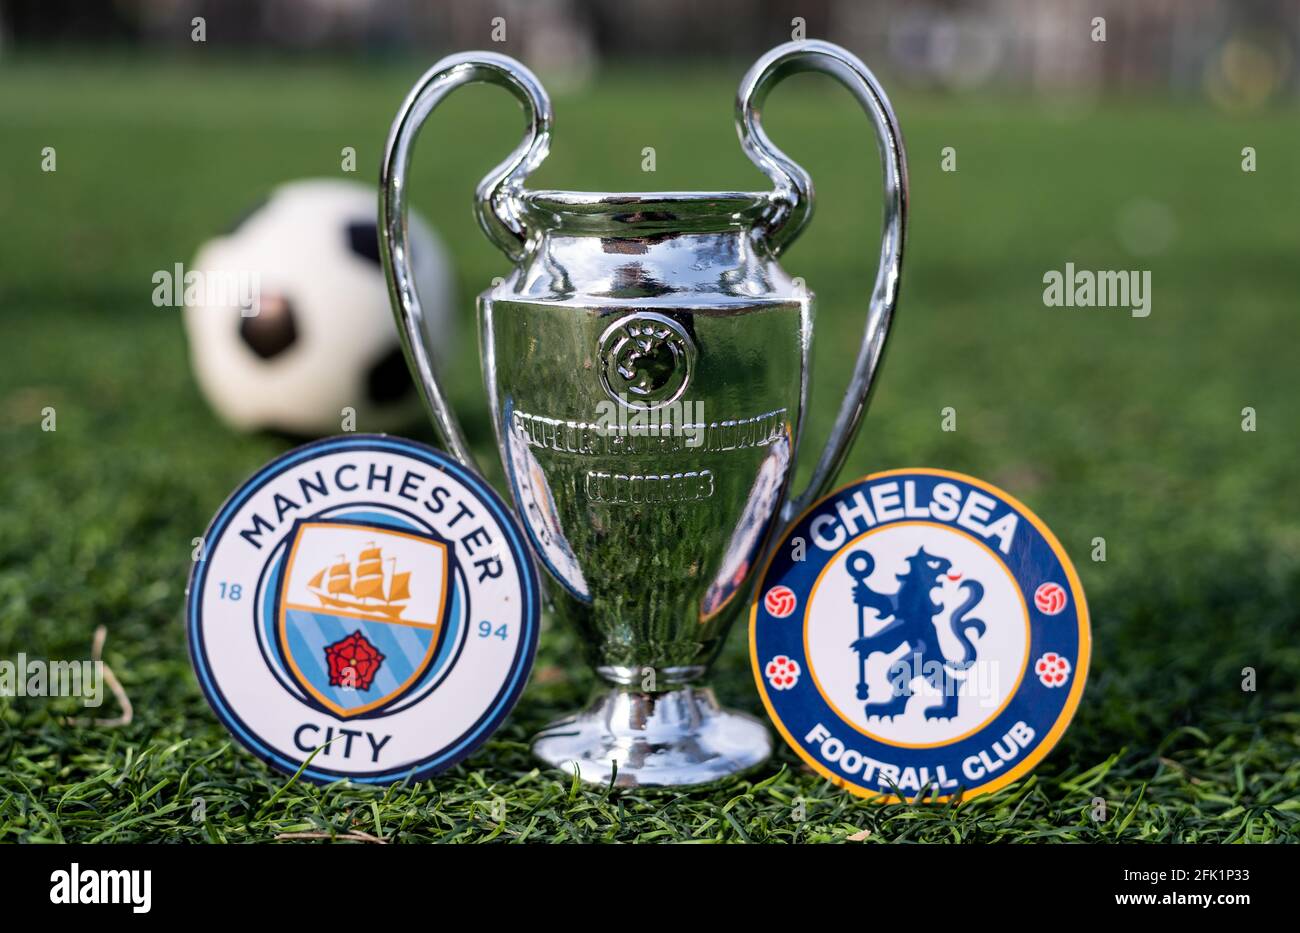 April 16 21 Moscow Russia The Uefa Champions League Cup And The Emblems Of The Manchester City F C And Chelsea F C London Football Clubs On T Stock Photo Alamy